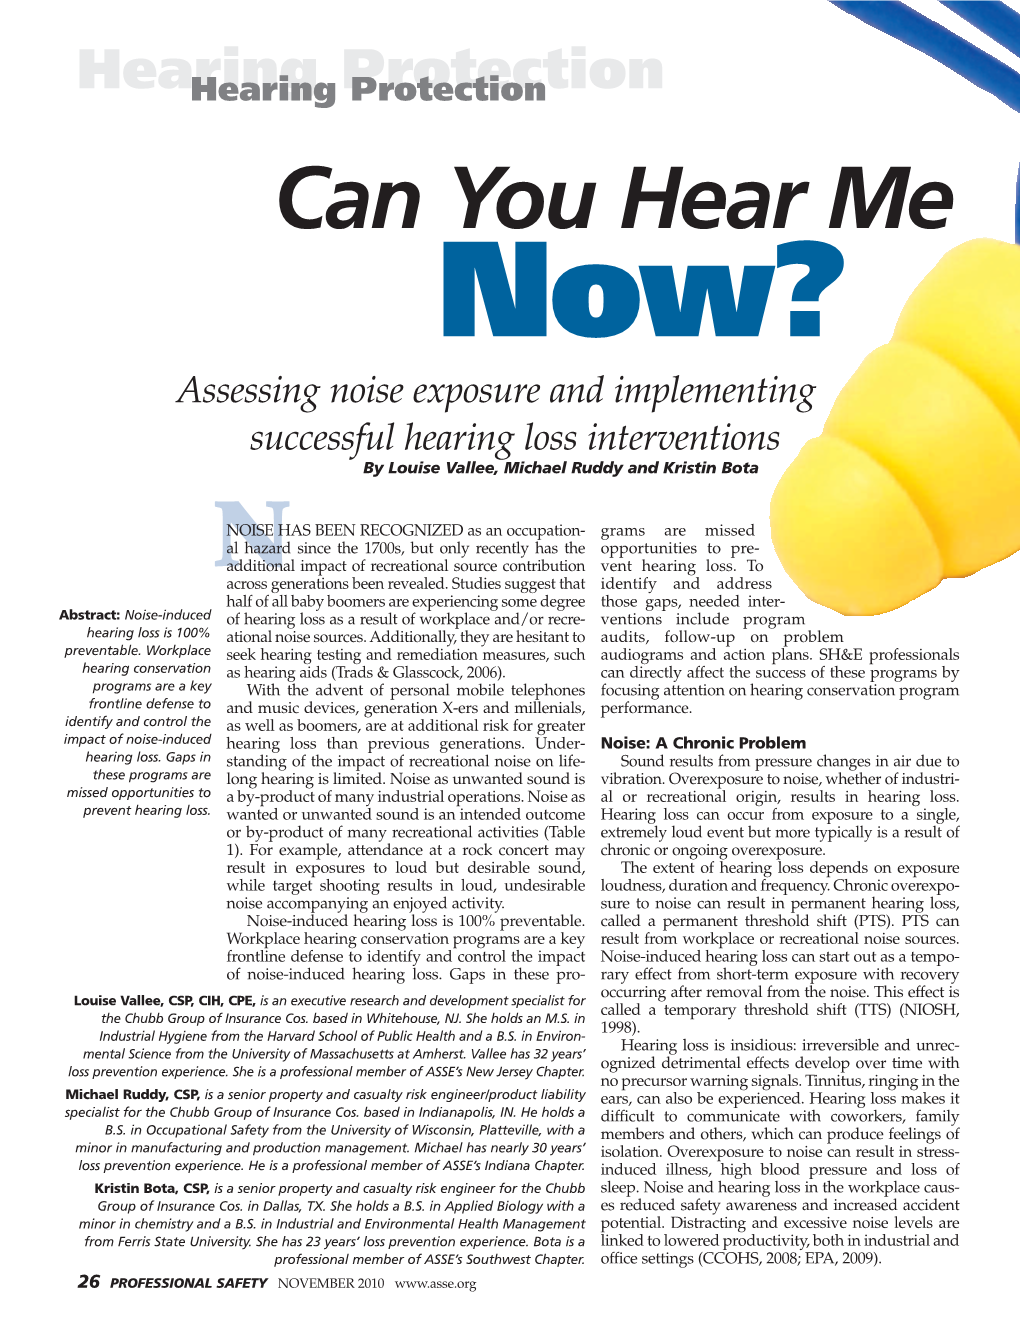 Can You Hear Me Now? Assessing Noise Exposure and Implementing Successful Hearing Loss Interventions by Louise Vallee, Michael Ruddy and Kristin Bota